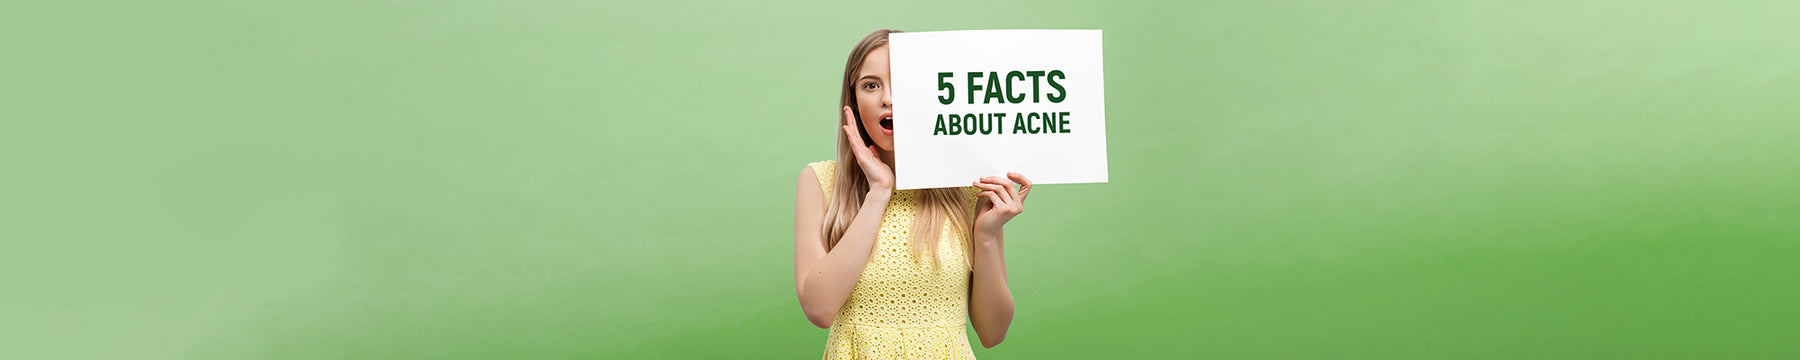 Interesting Facts About Acne